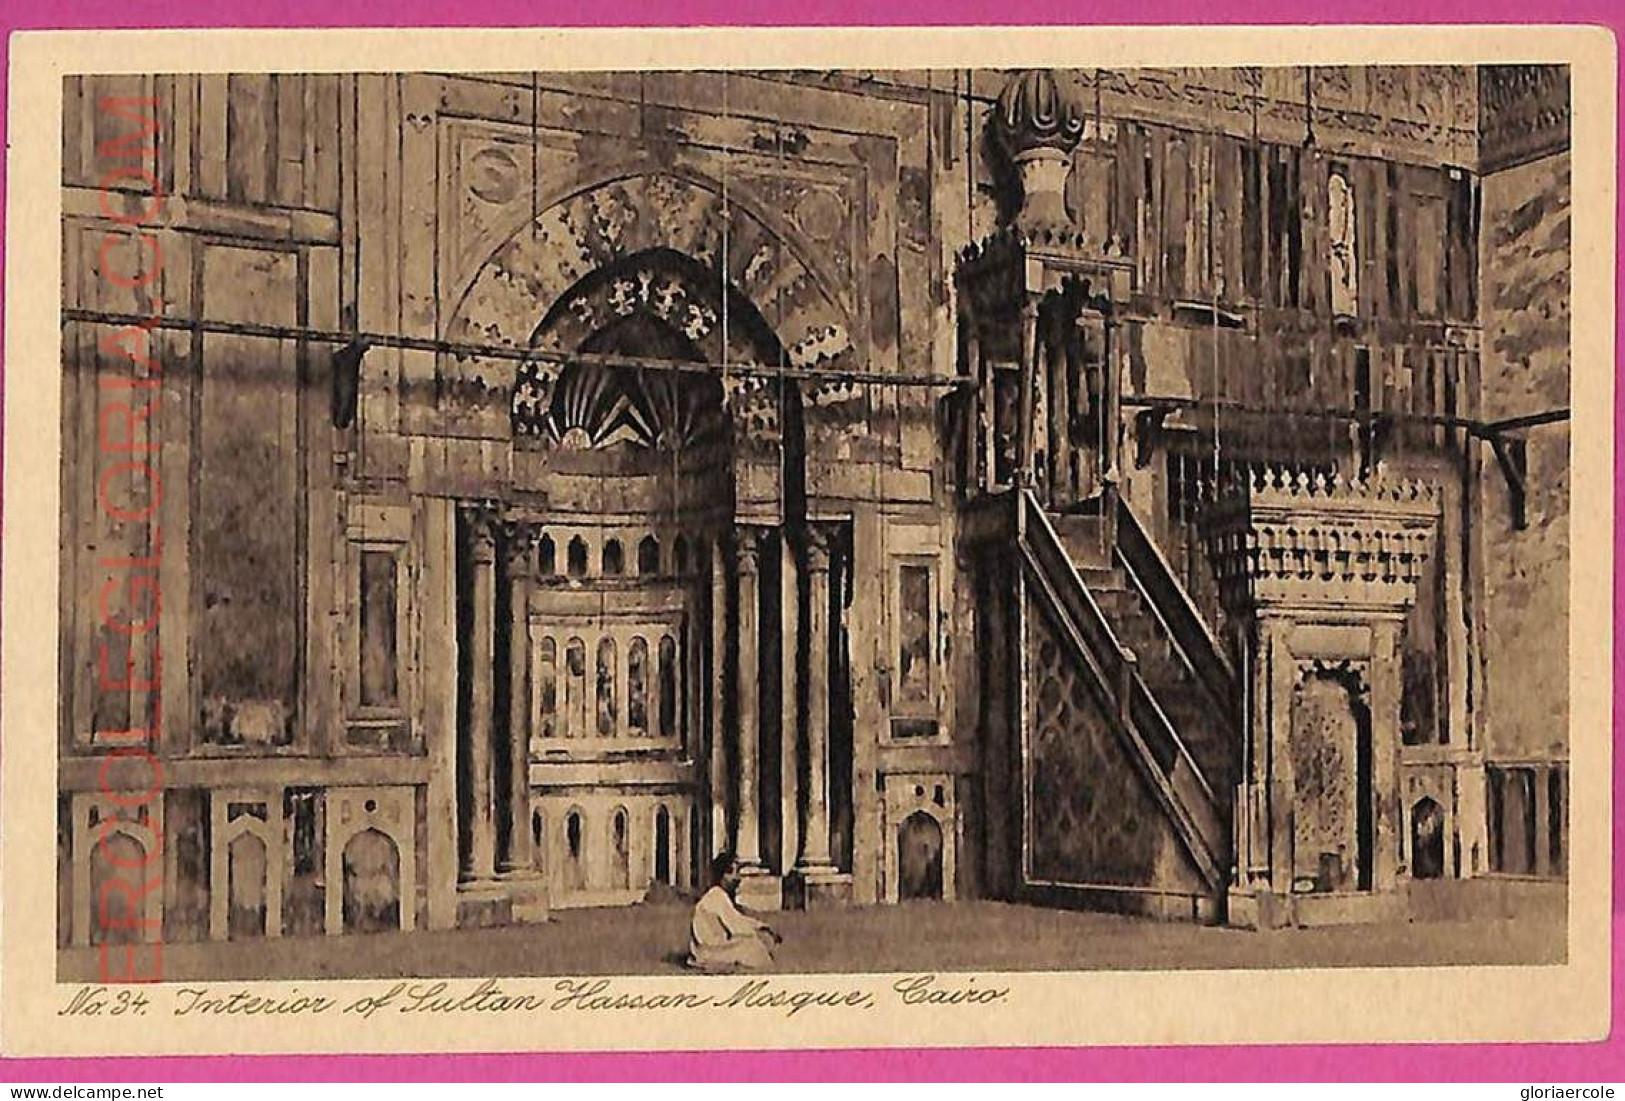 Ag2954 - EGYPT - VINTAGE POSTCARD - Cairo - Interior Of Sultan Hassan Mosque - Le Caire